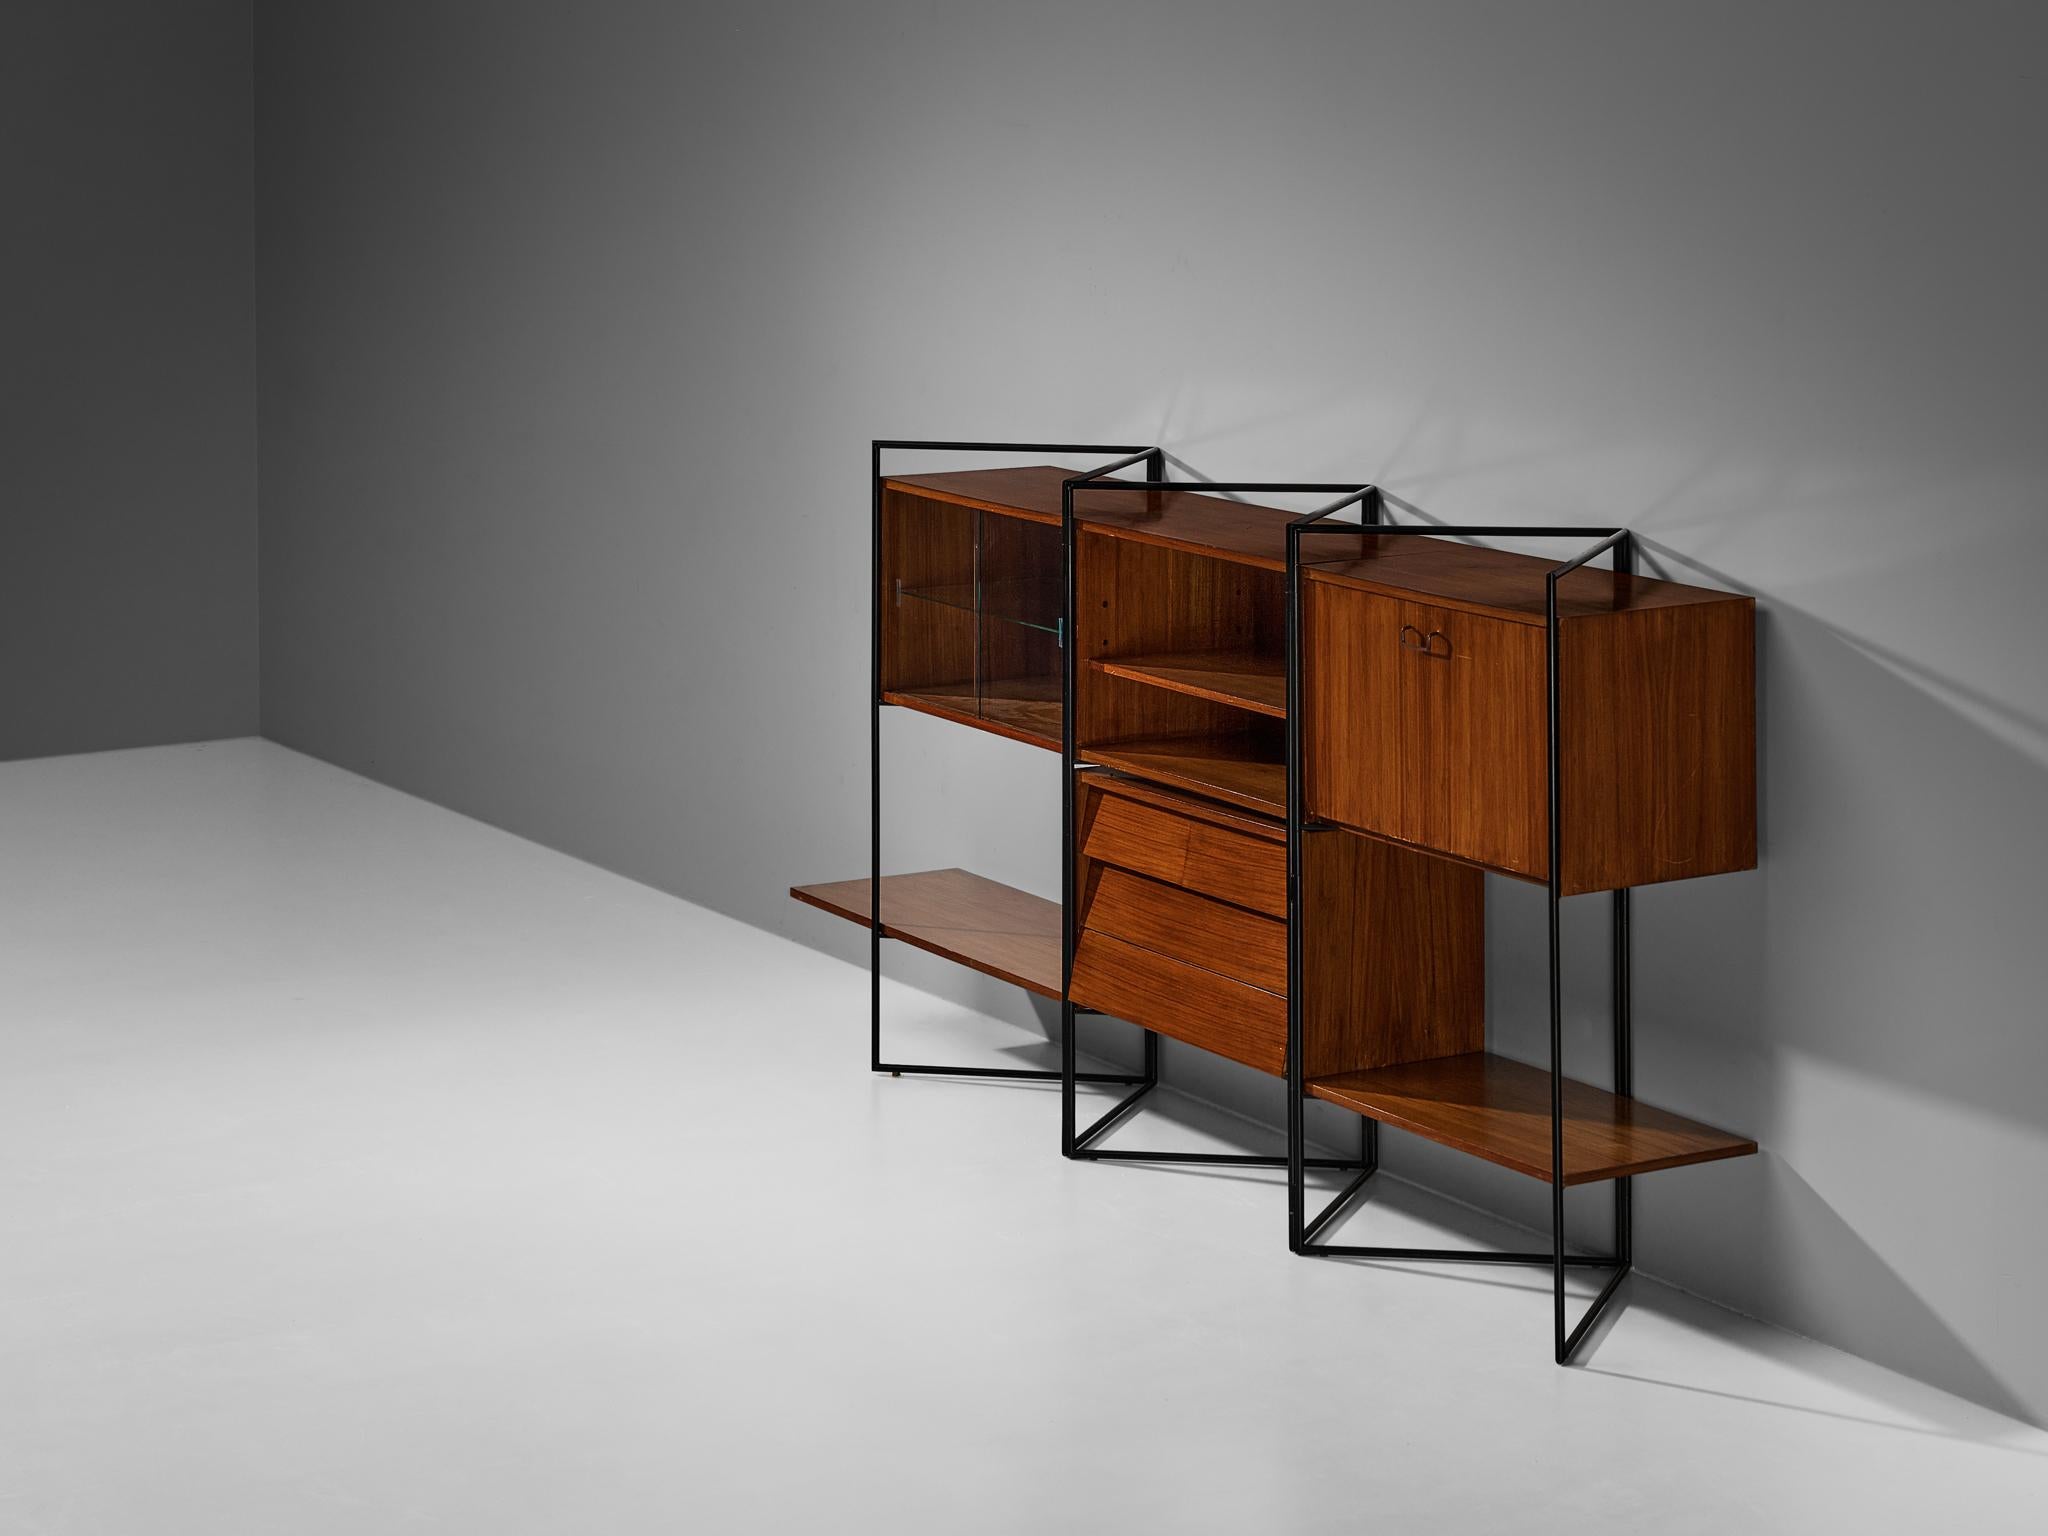 Taichiro Nakay (Nakai) for La Permanente Mobili, bookcase, lacquered iron, teak, glass, brass, maple, ca. 1955

Taichiro Nakai is an incredibly talented Japanese designer who is mostly known for his participation at the Selettiva del Mobili